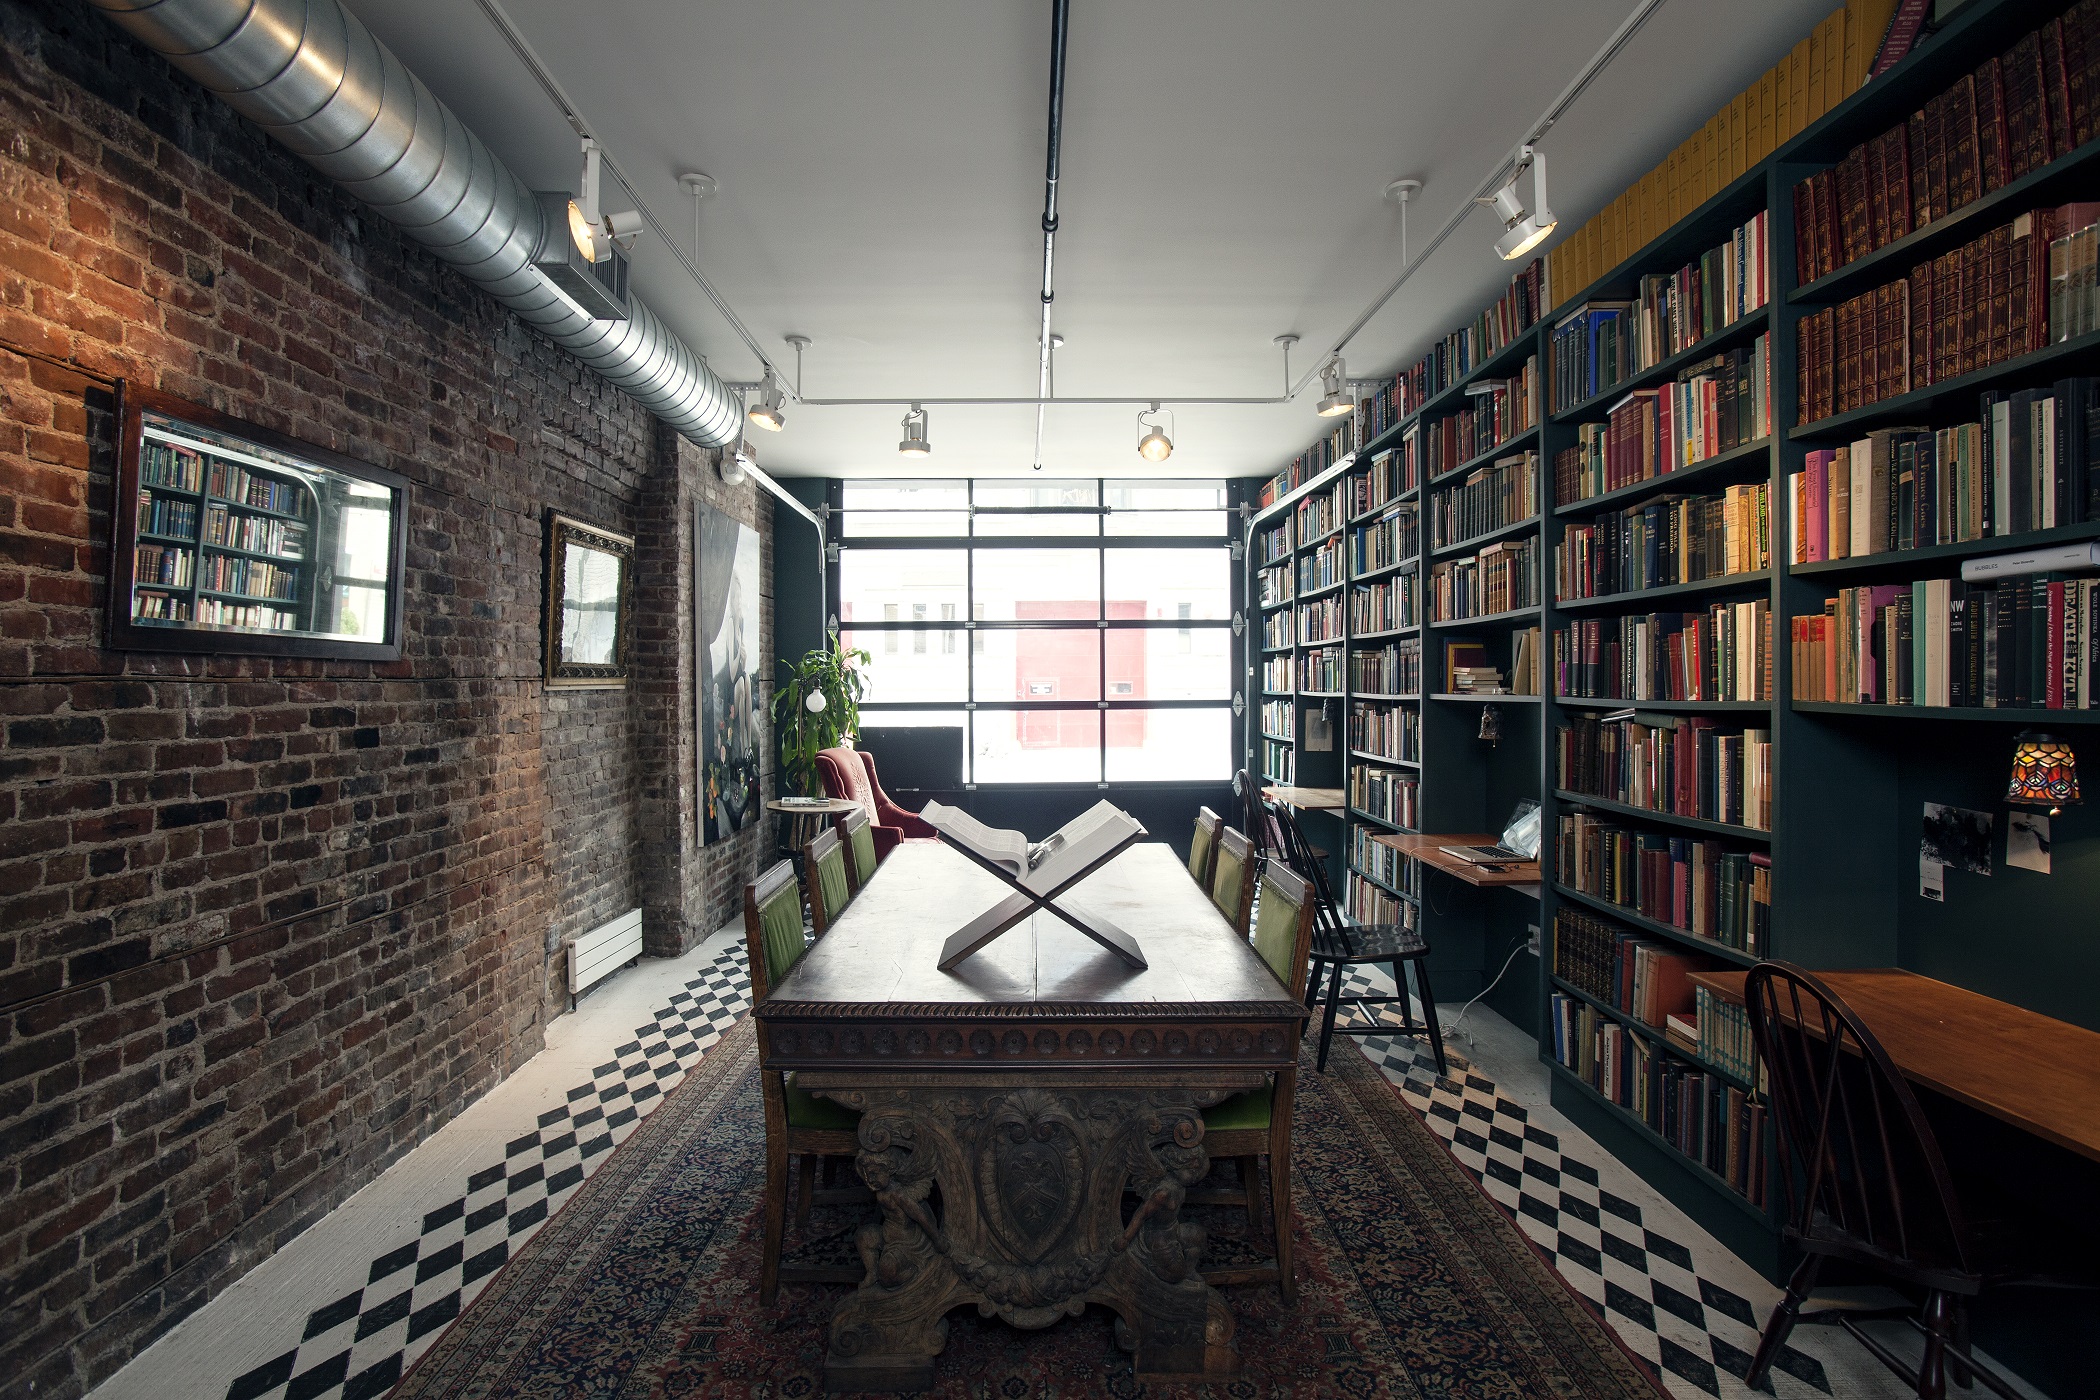 Host your next book party in this cozy Manhattan apartment library.